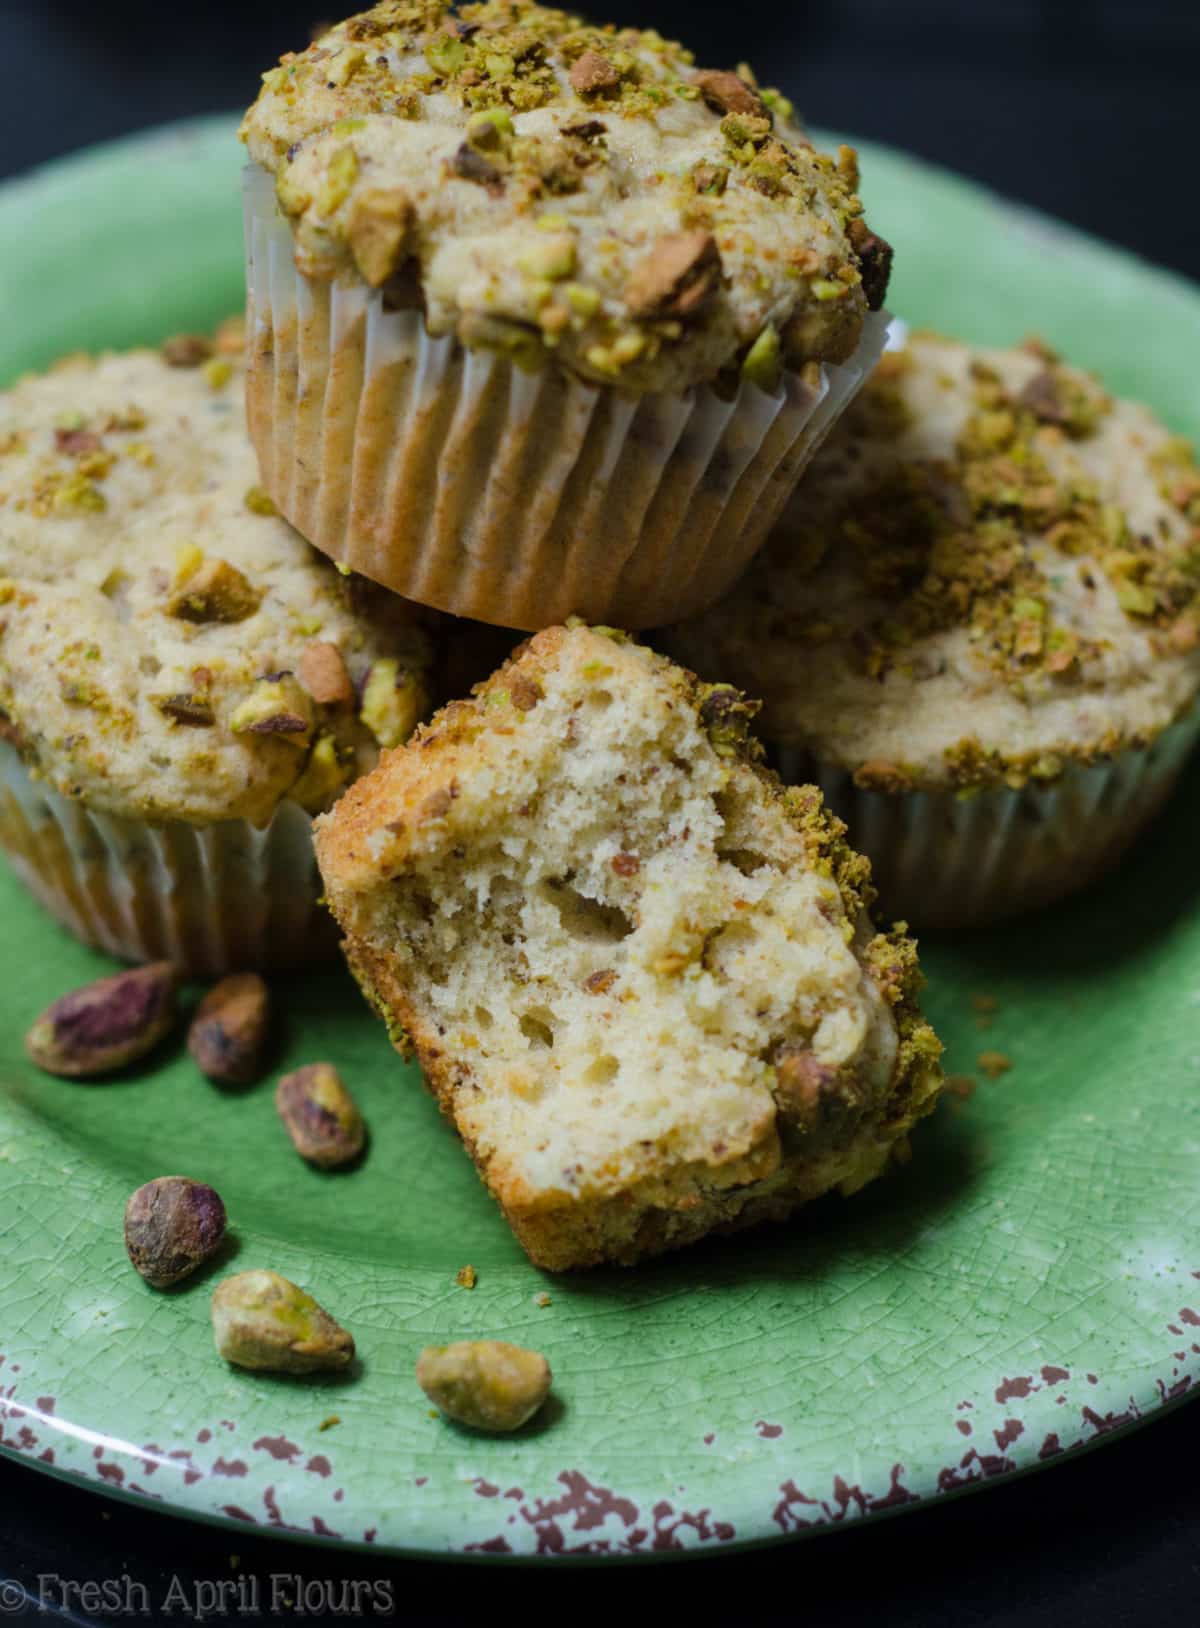 pistachio muffins on a plate and one has a bite taken out of it